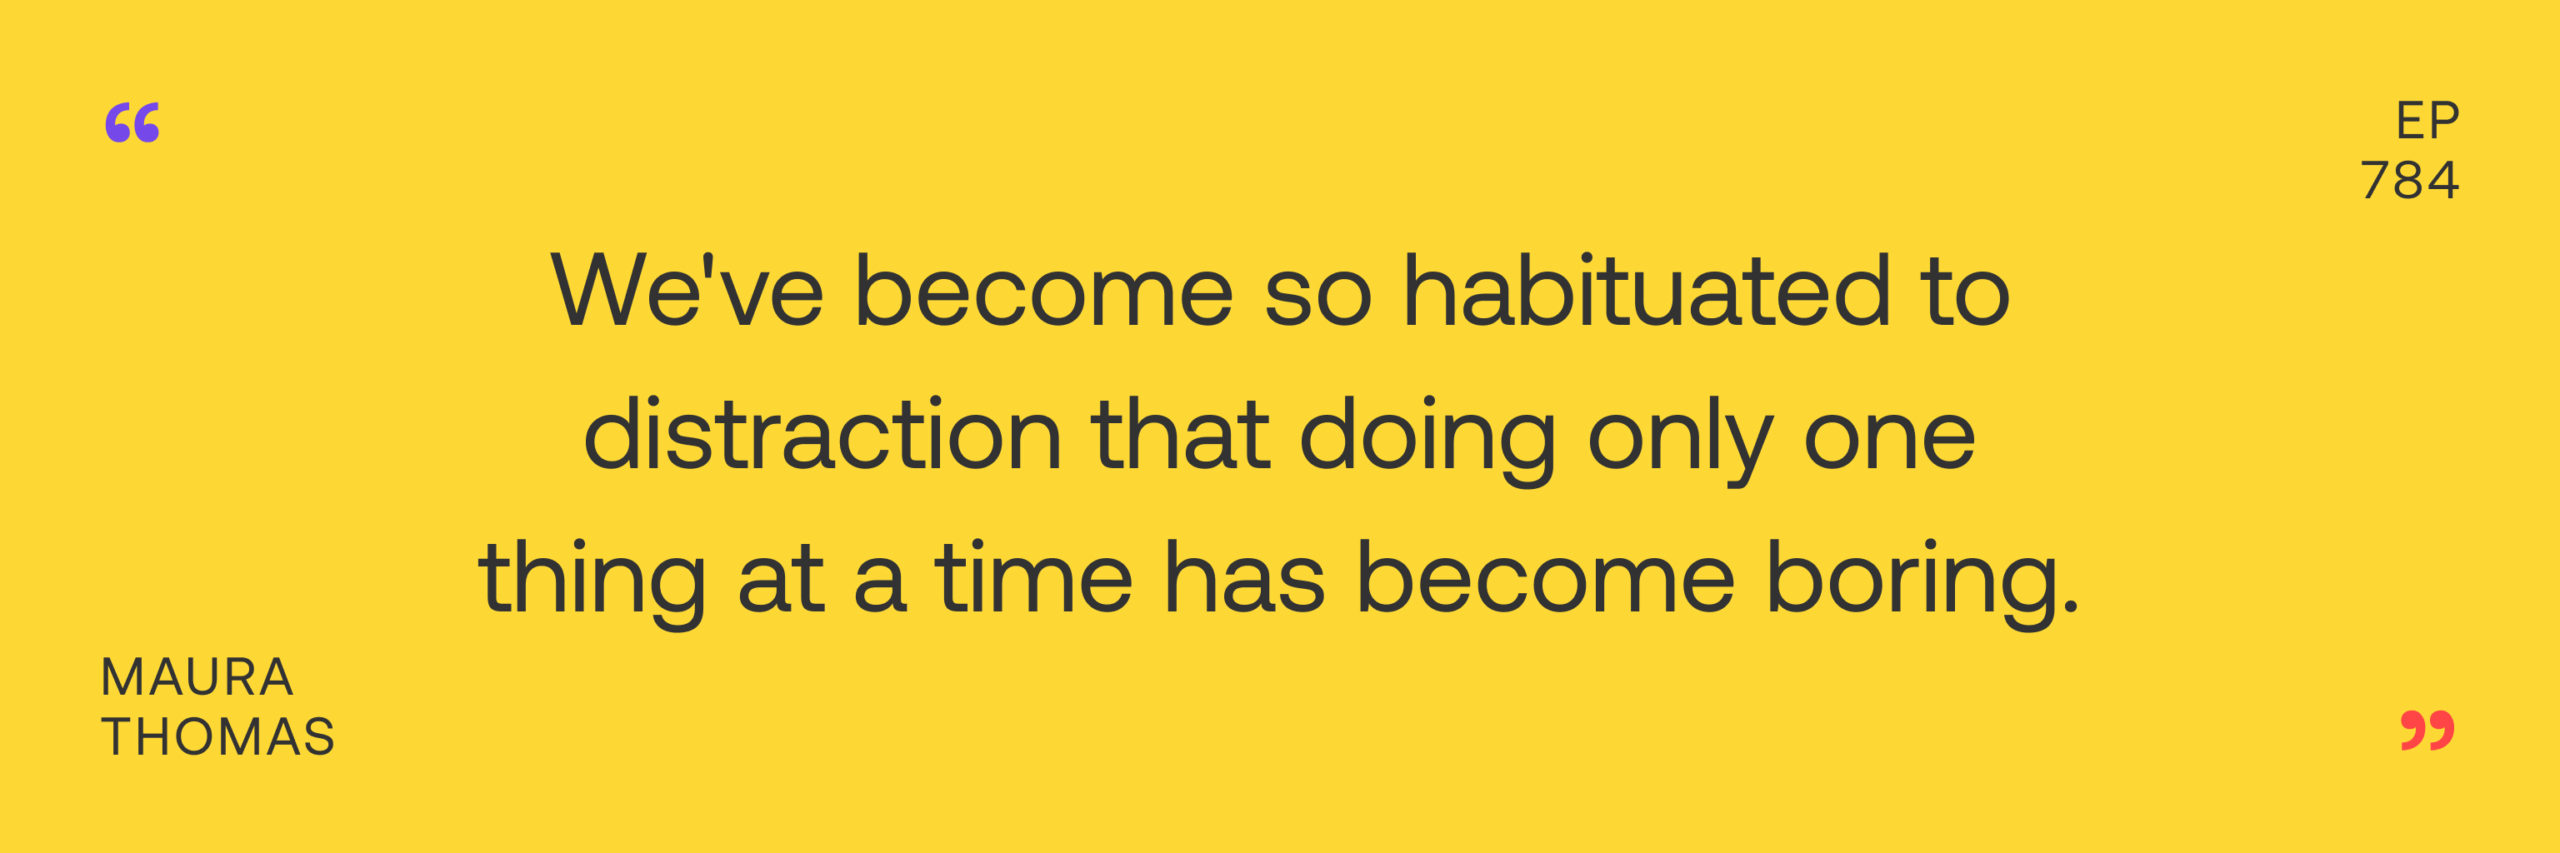 maura thomas quote about distraction and habits